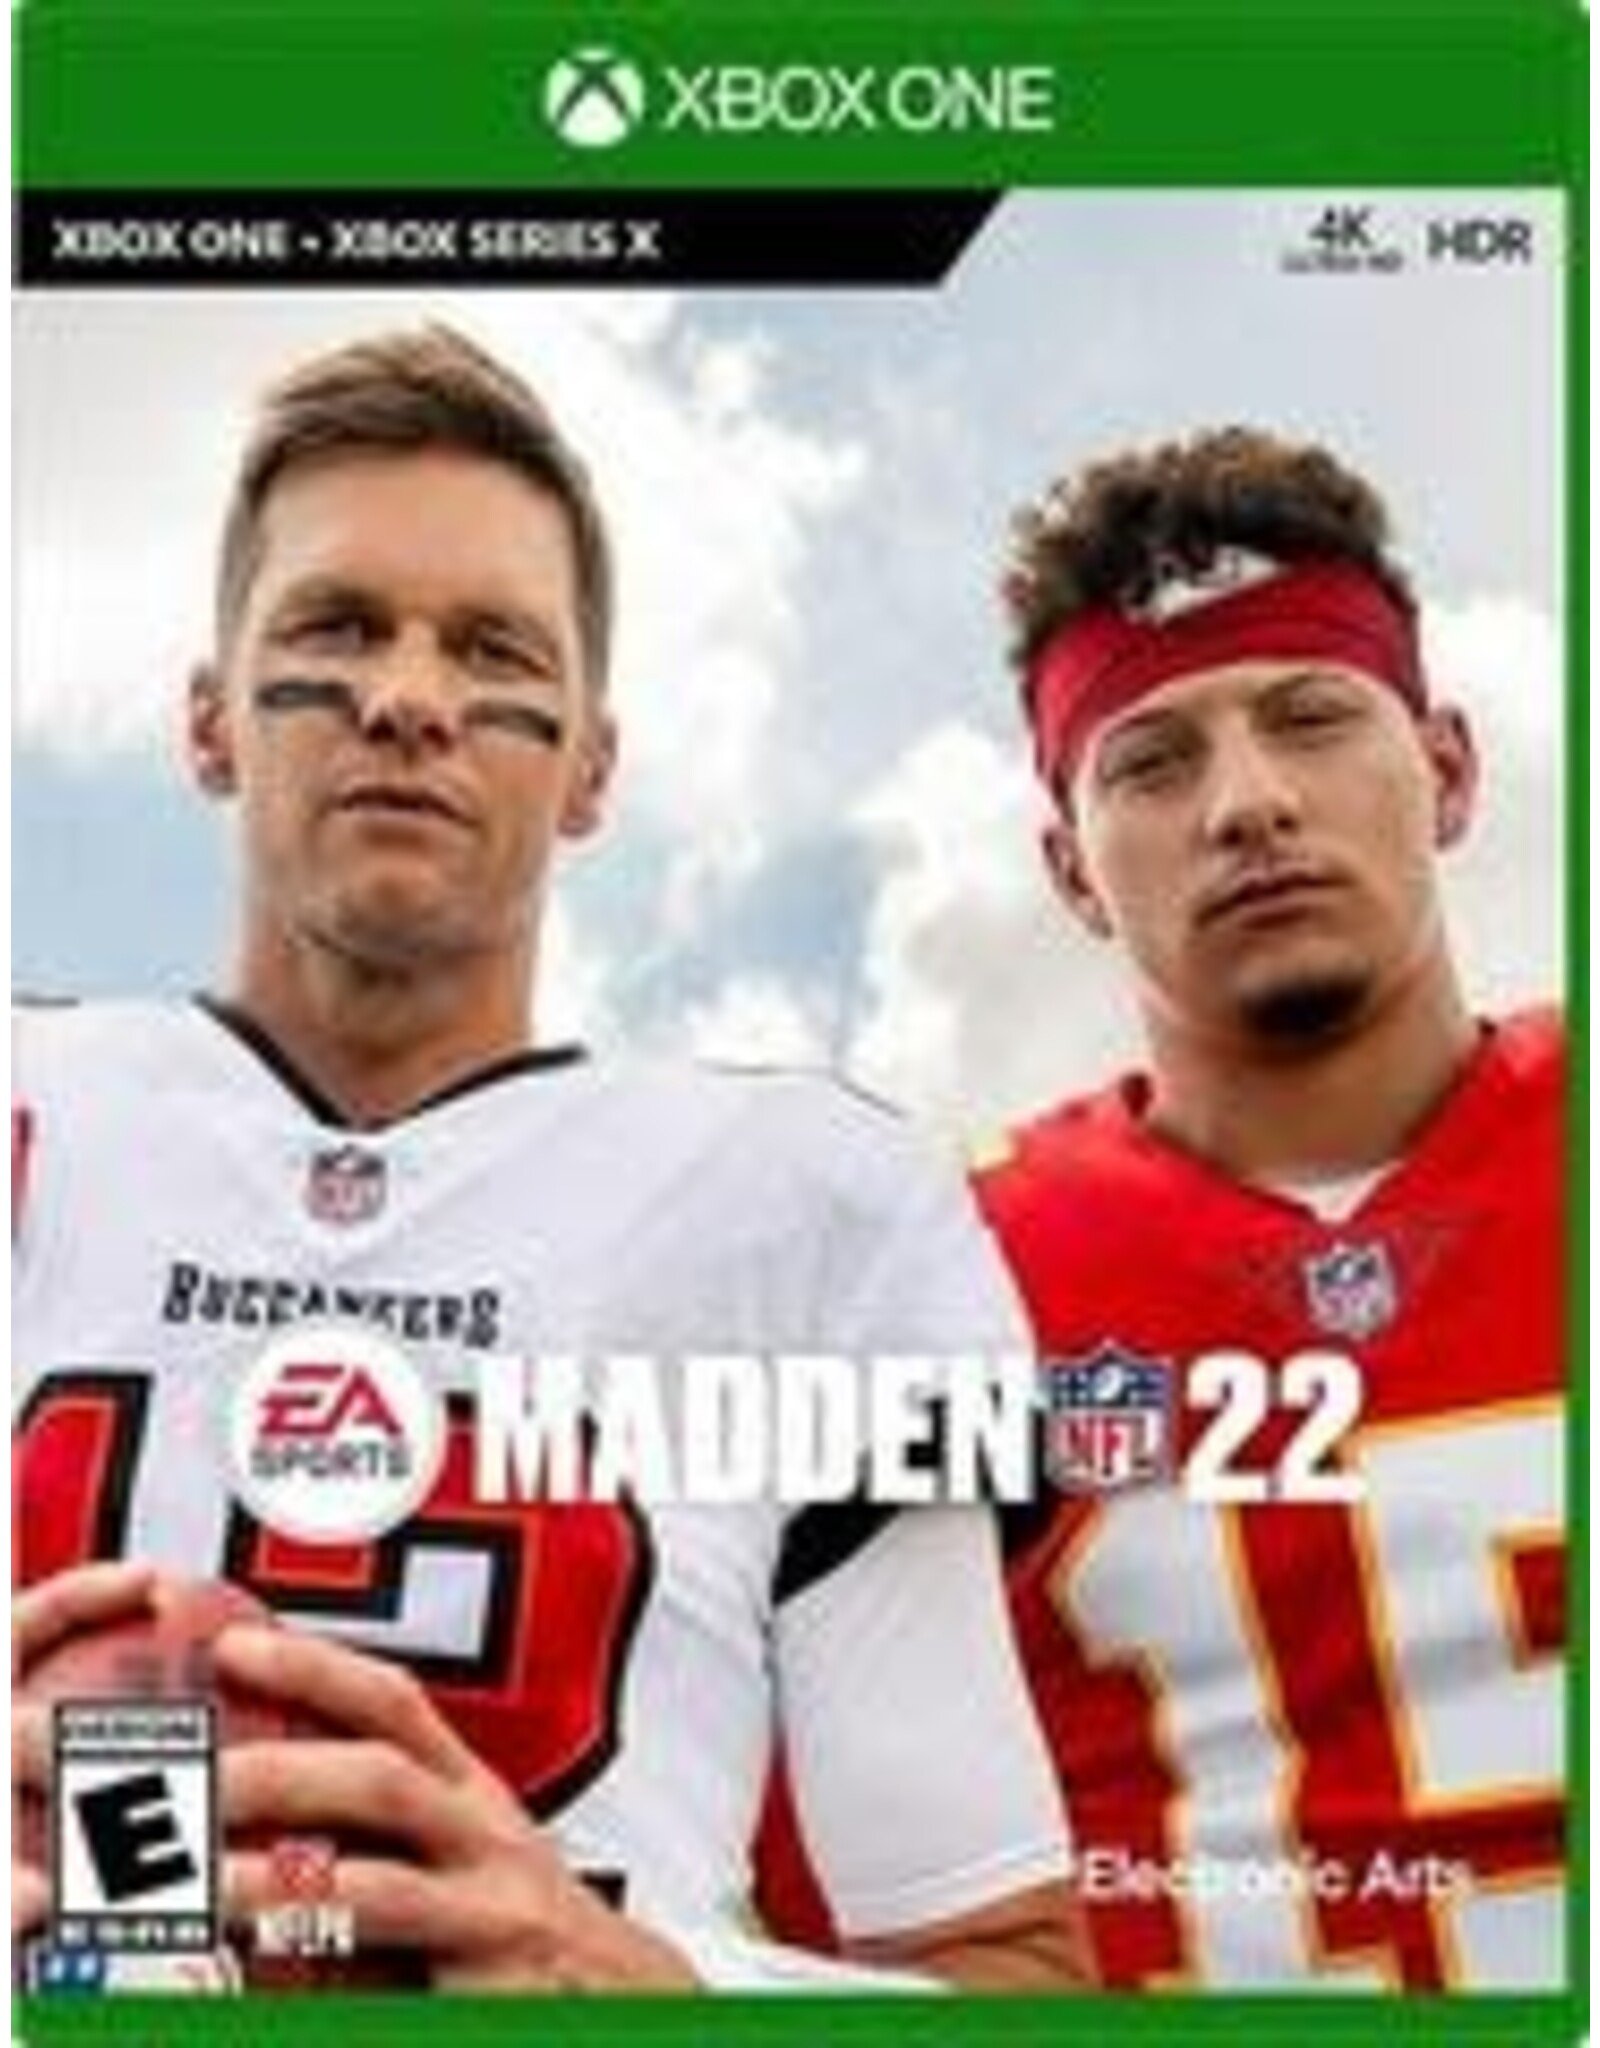 Xbox One Madden NFL 22 (Used)